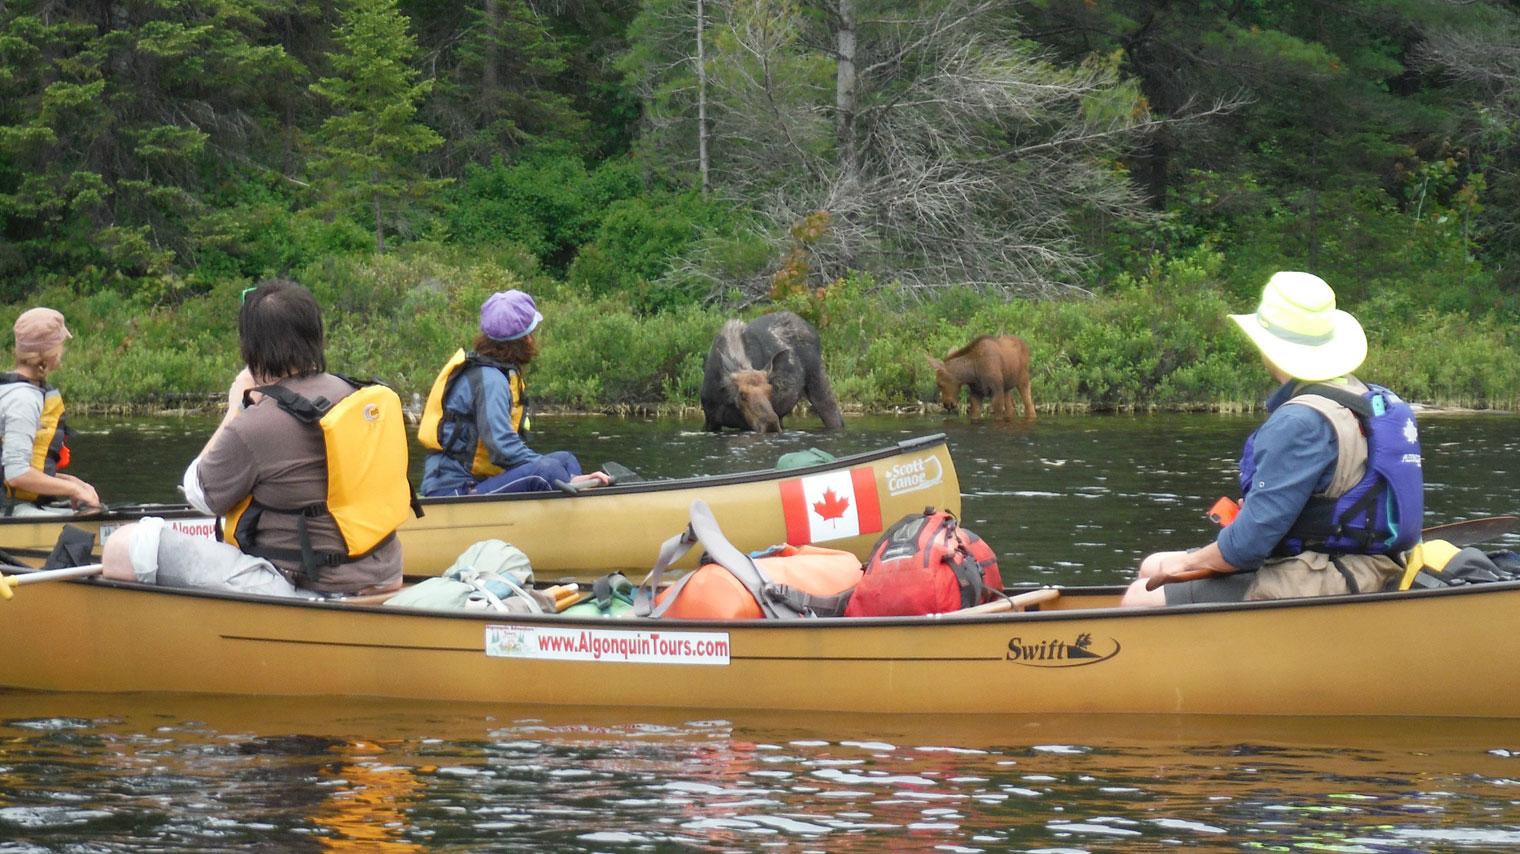 how to go to algonquin park from toronto